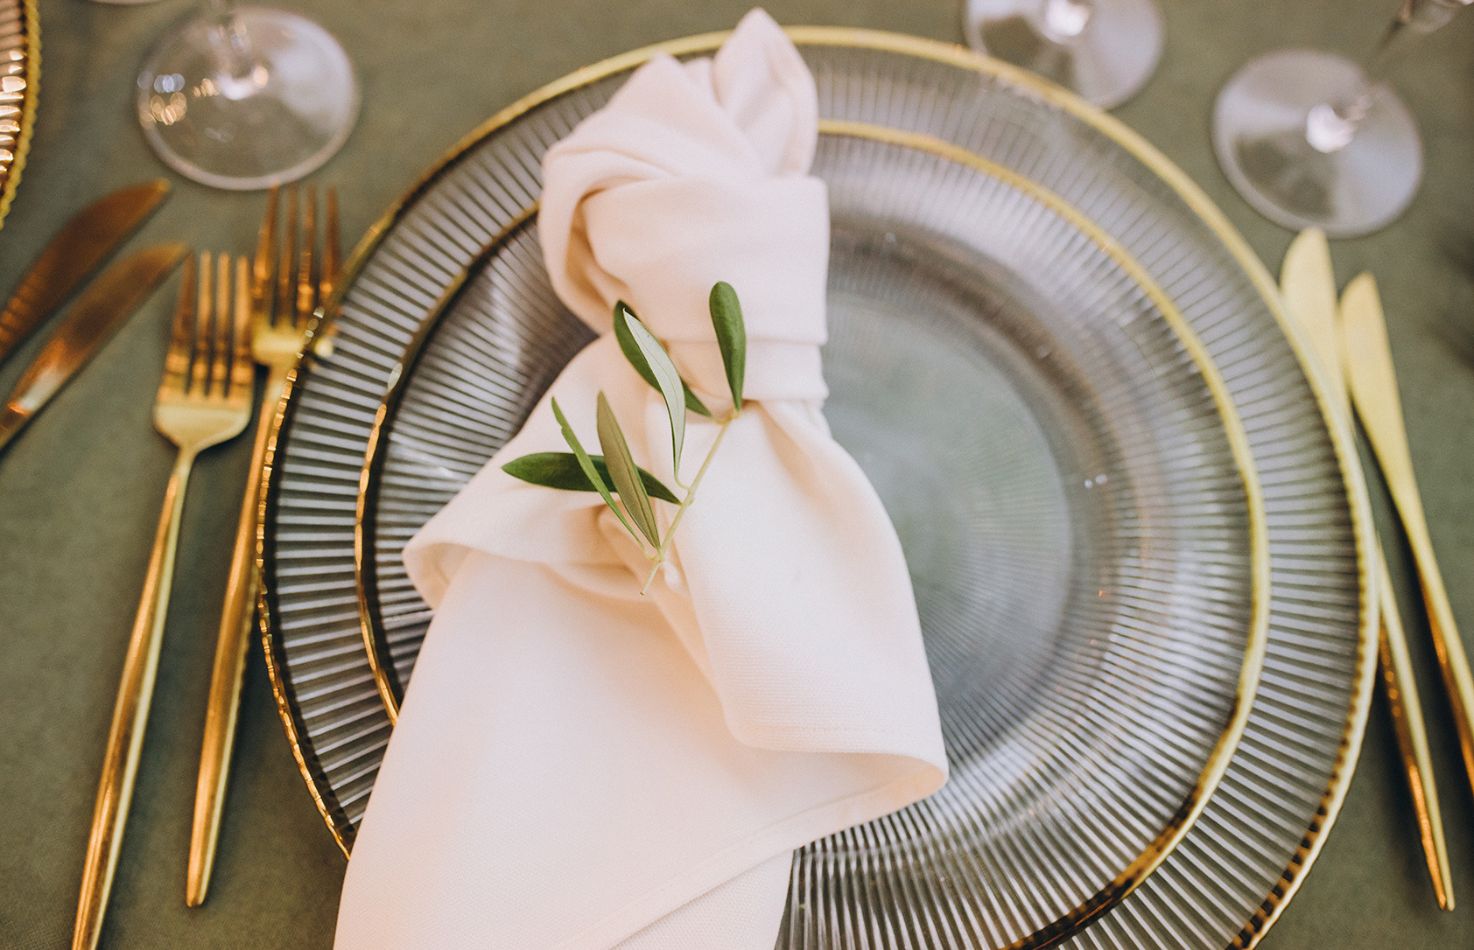 Correct Placement of Napkins and Utensils on a Table